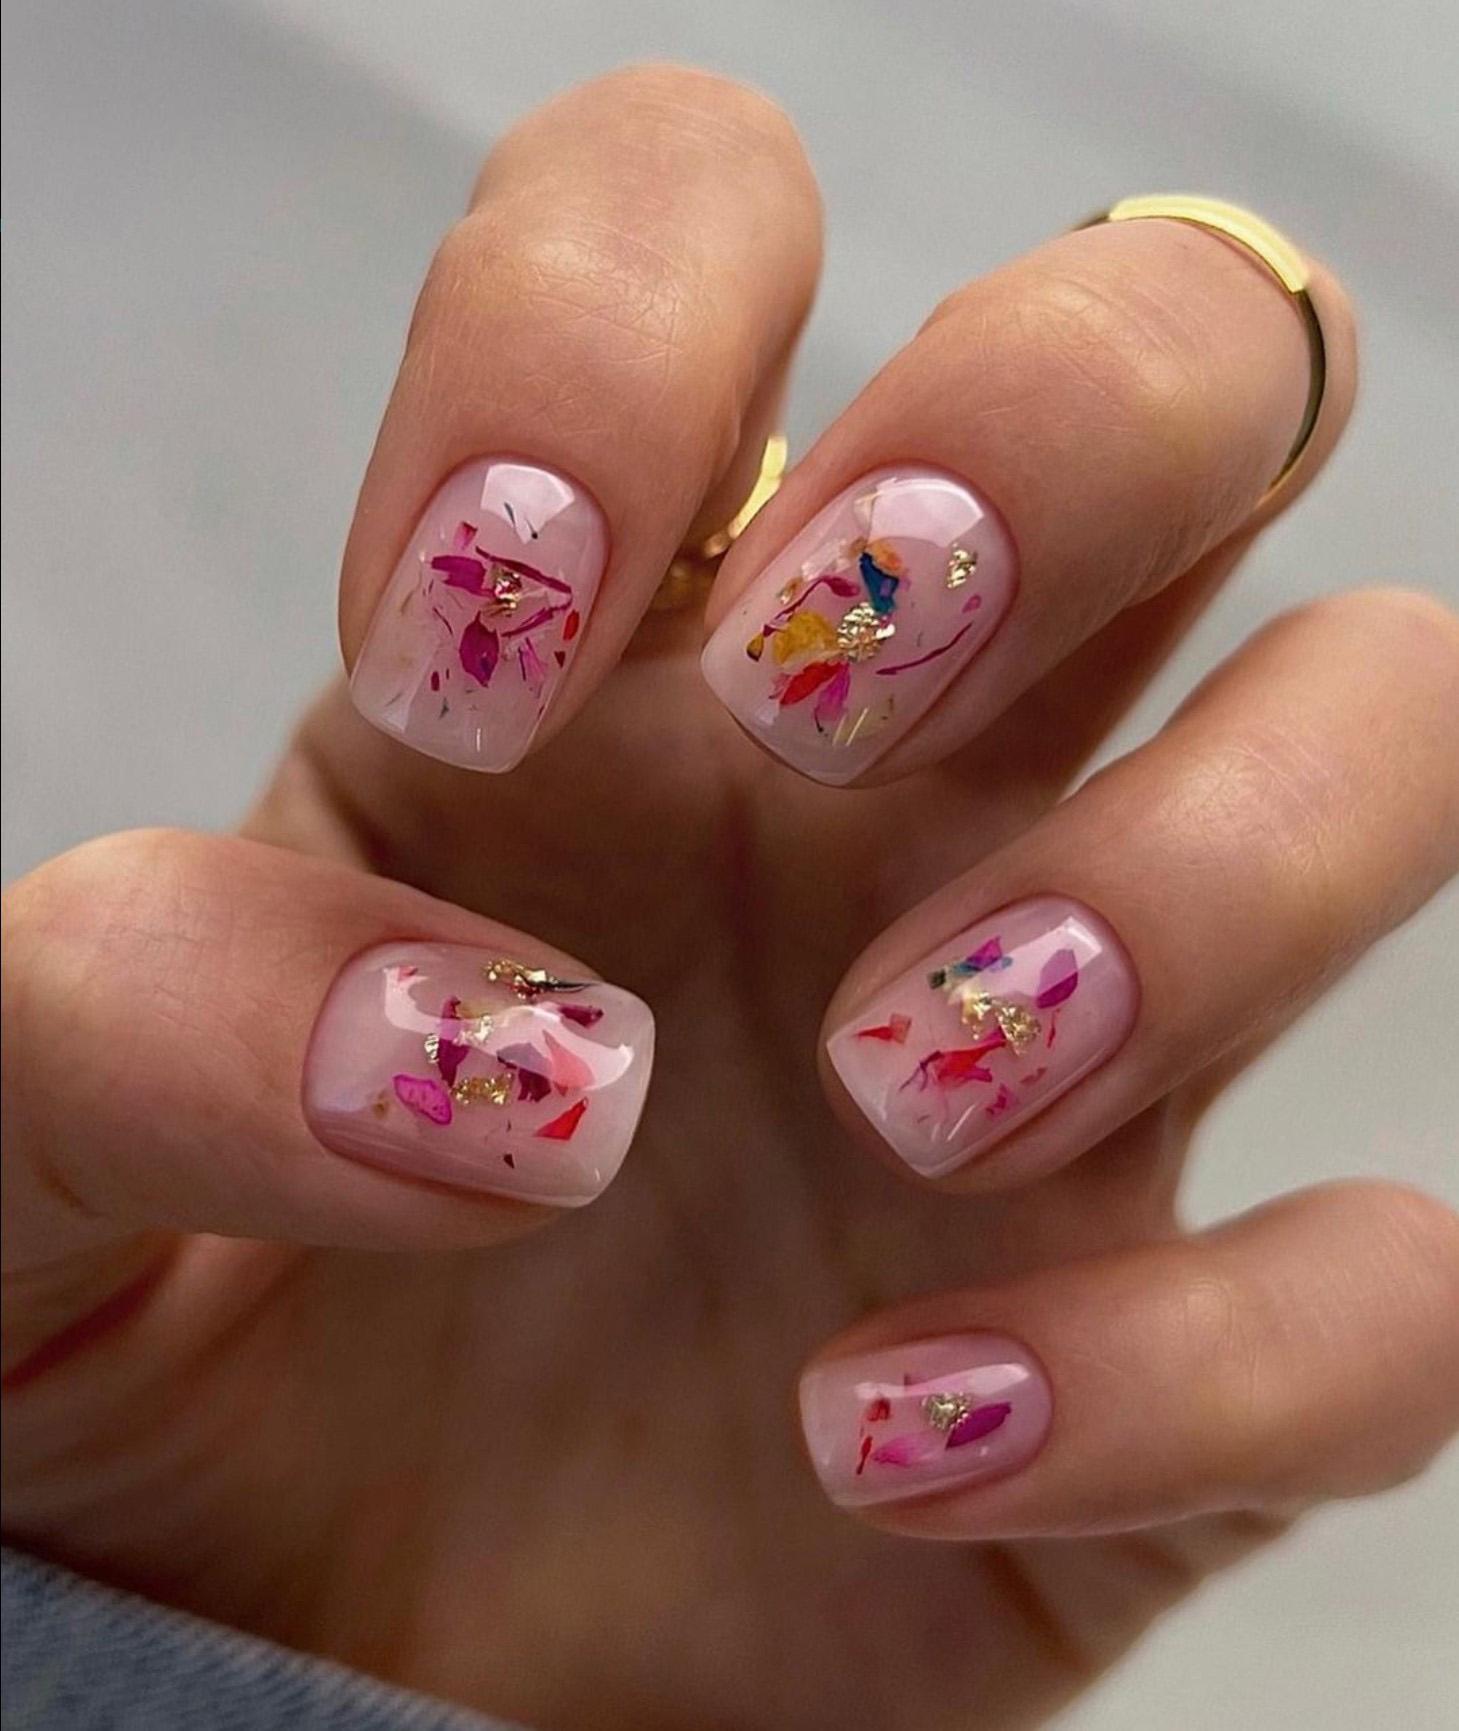 Transparent nails with decor look like a work of art